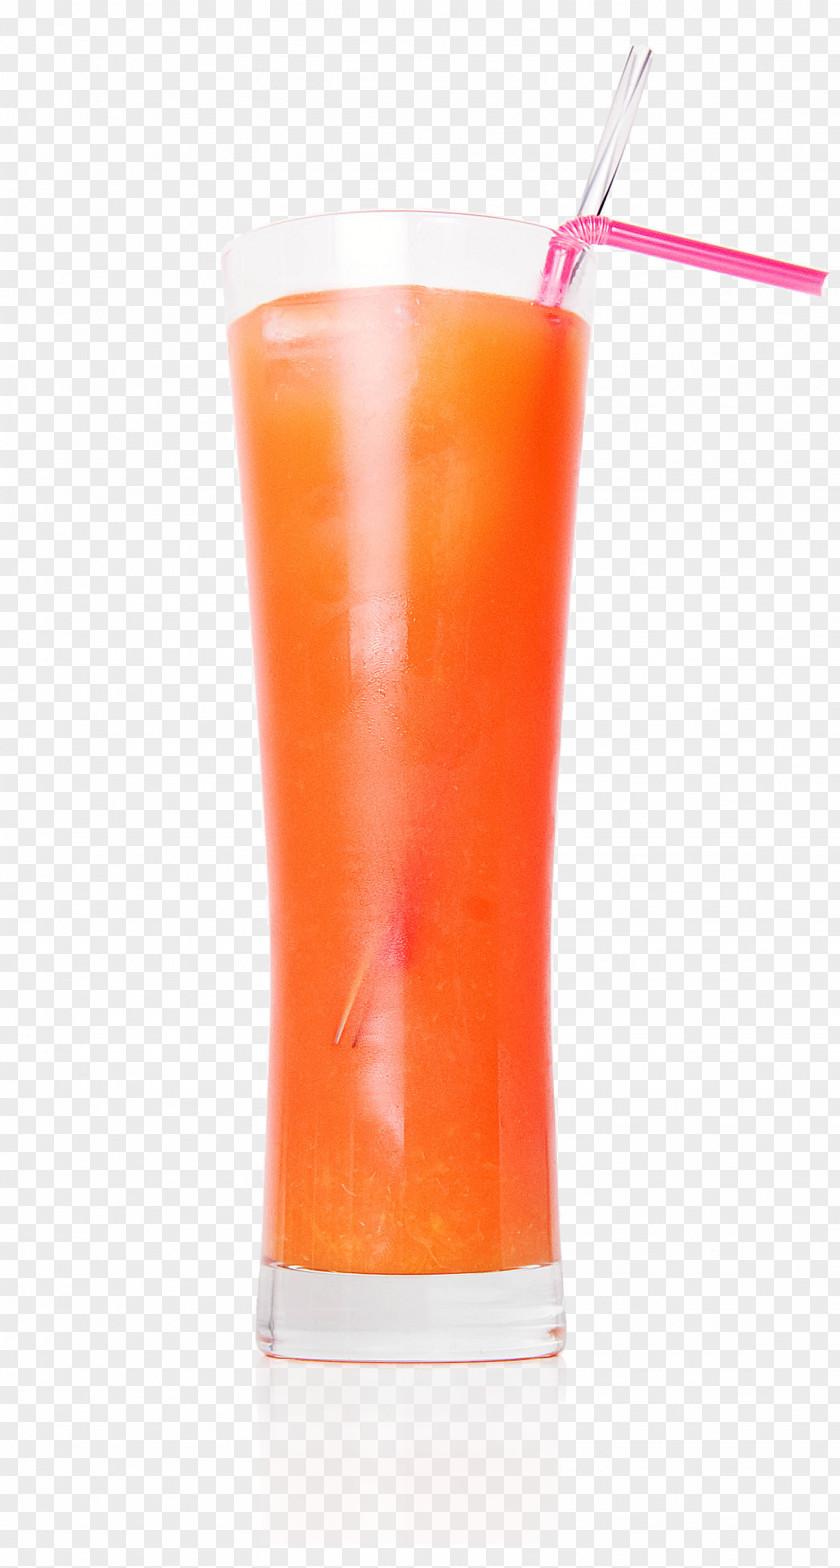 Cocktail Sex On The Beach Vodka Orange Juice Schnapps PNG on the juice Schnapps, Free clipart PNG